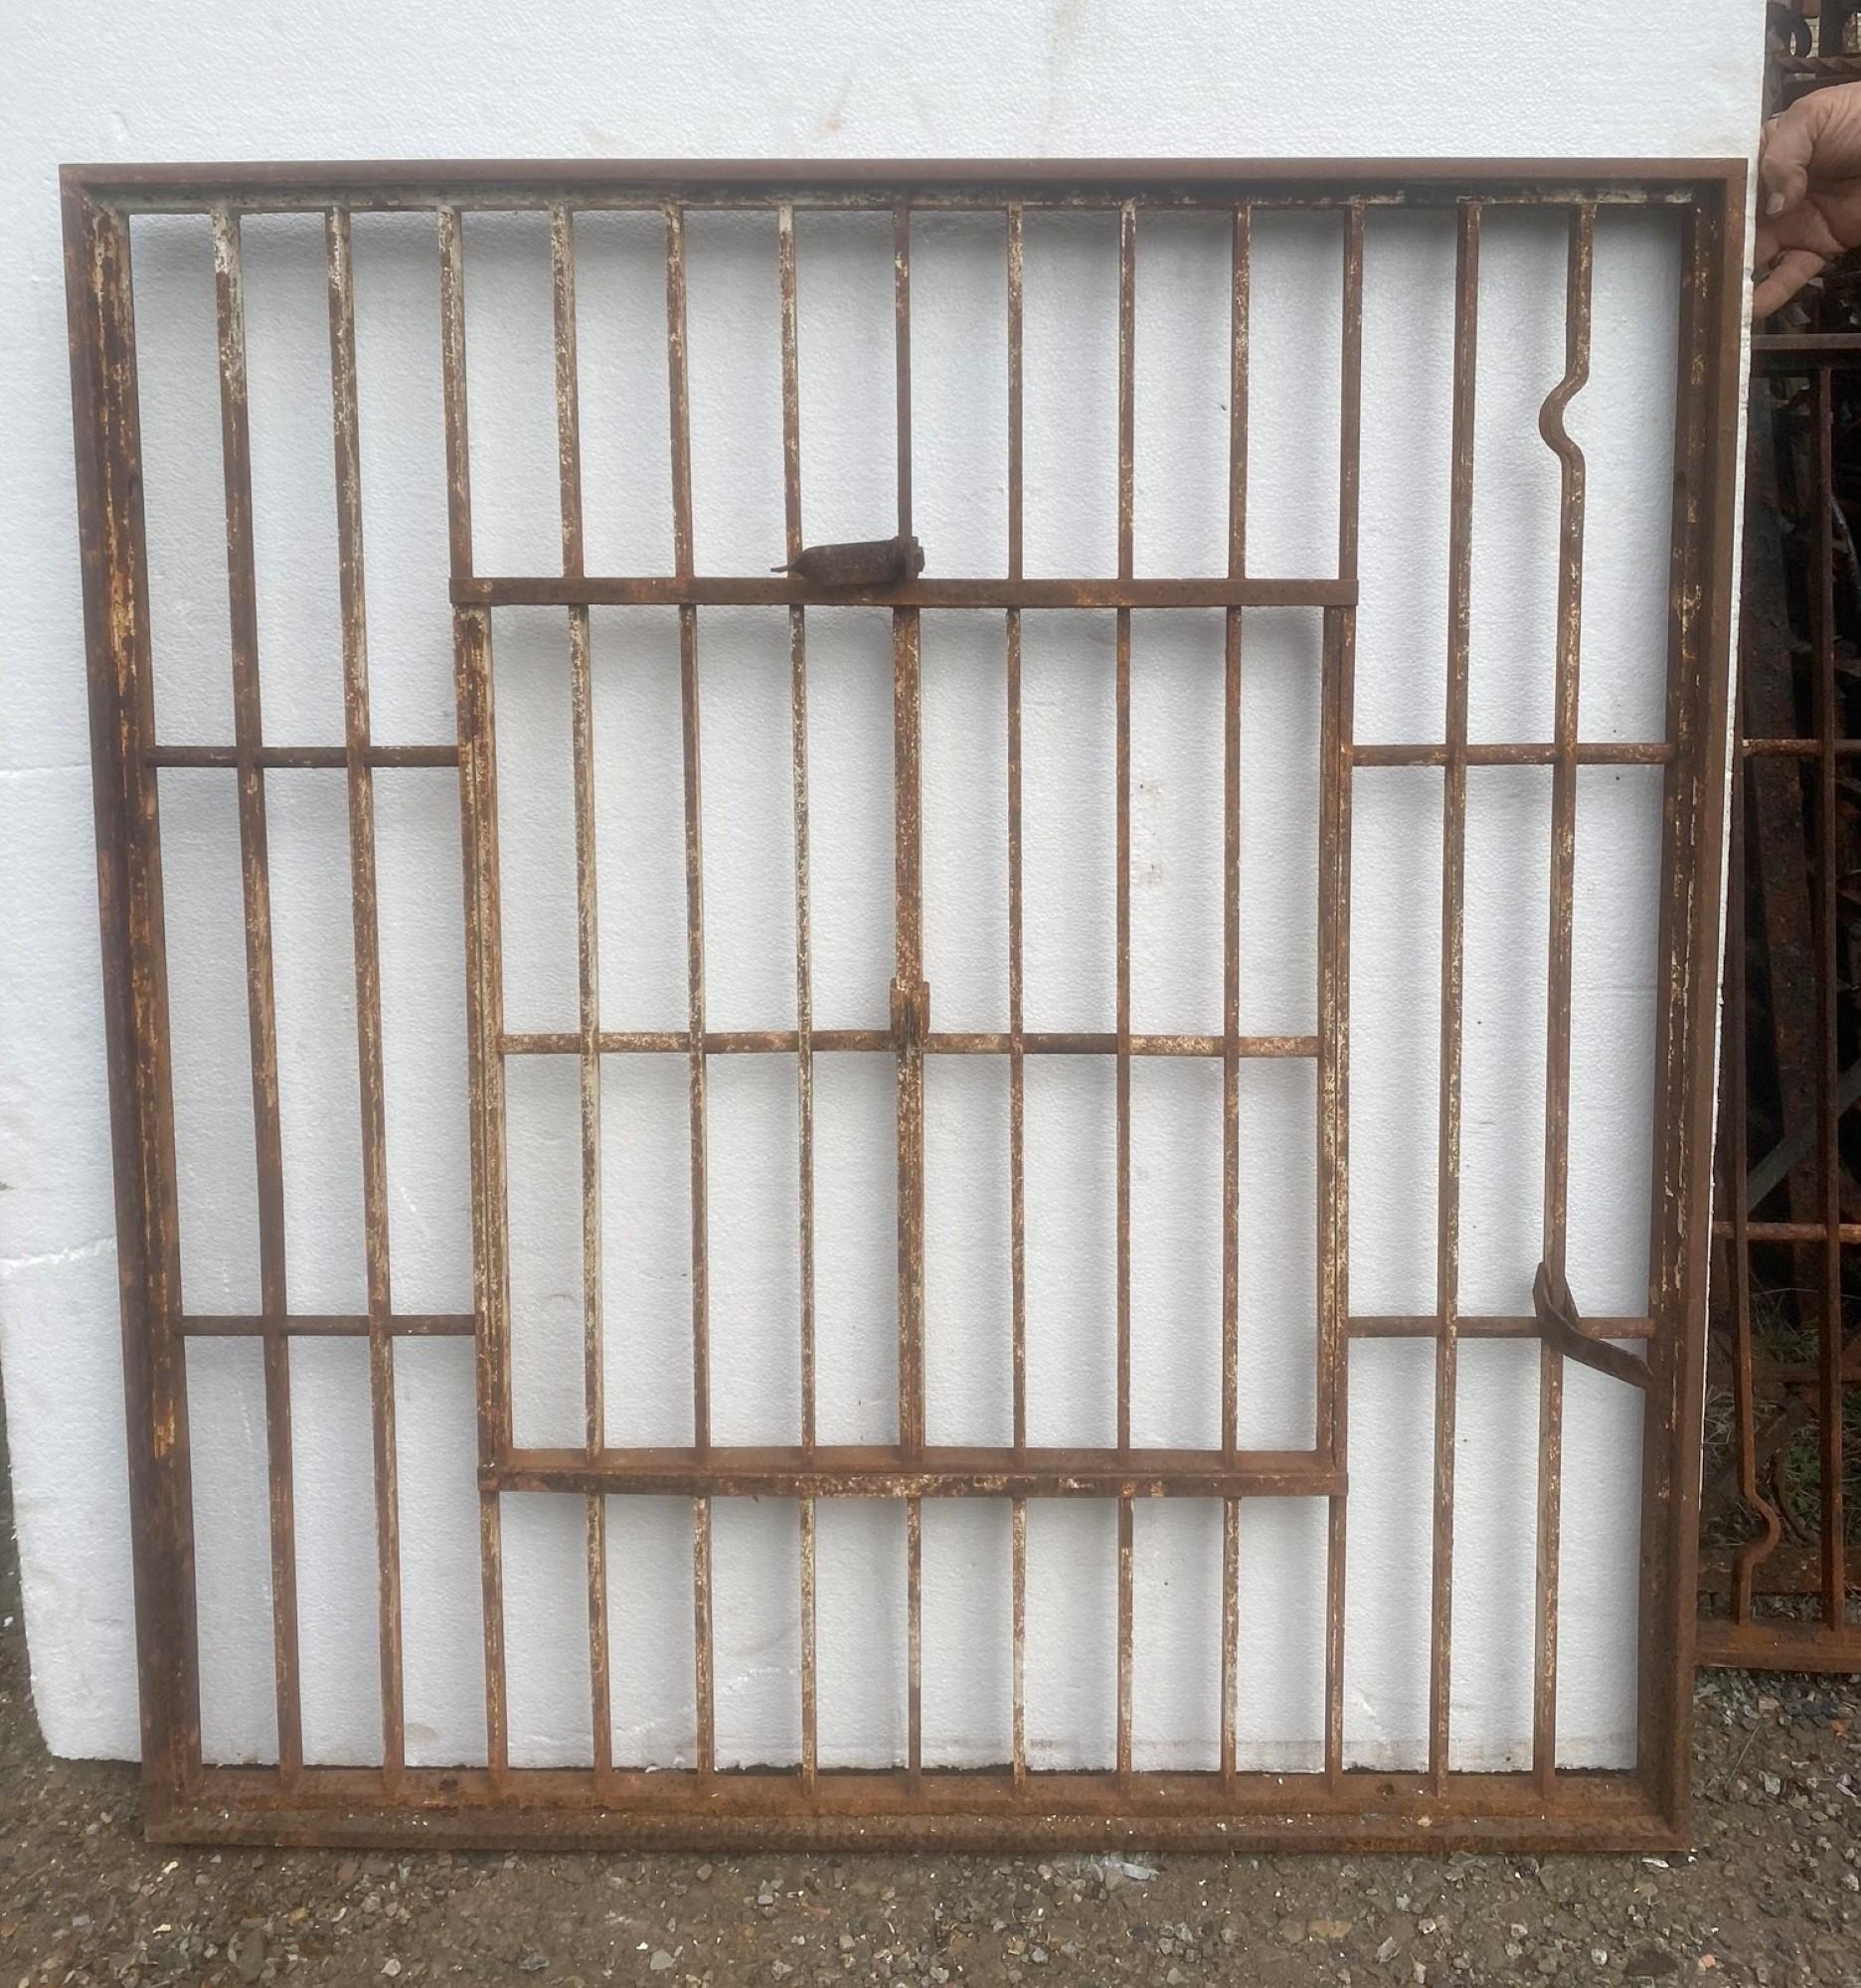 Early 20th century wrought iron or steel jail window with a double door hatch that opens. In salvaged condition. This can be seen at our 400 Gilligan St location in Scranton, PA.